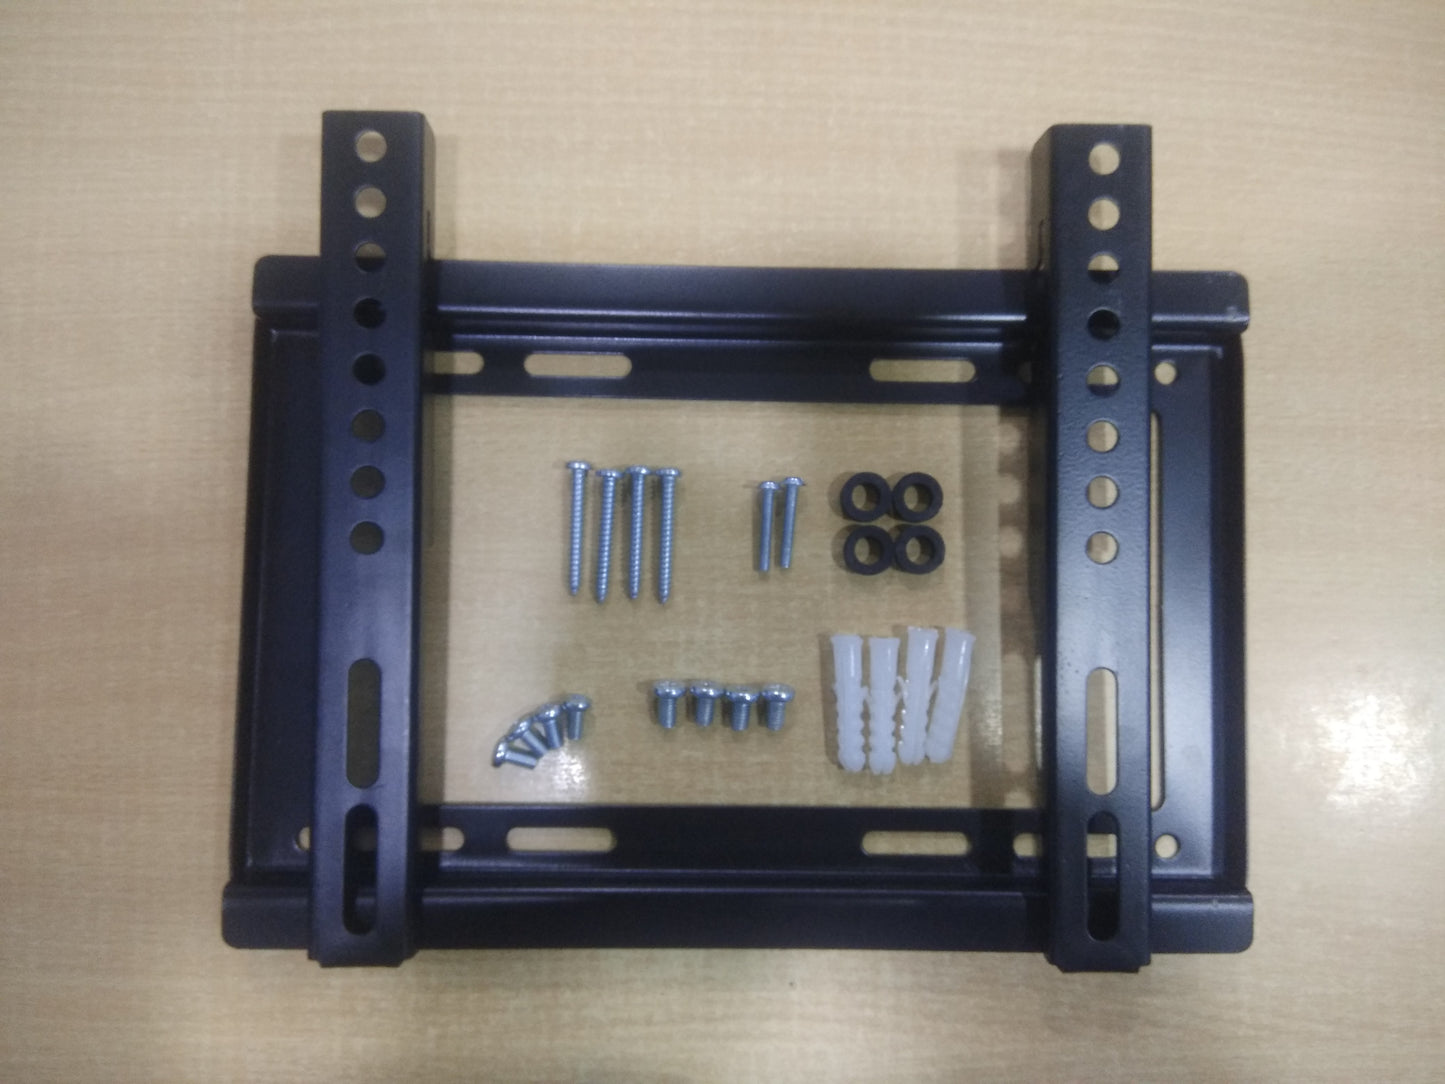 LED / LCD TV Wall mount Stand 14 inch to 42 inch with all Screws and Studs - Faritha